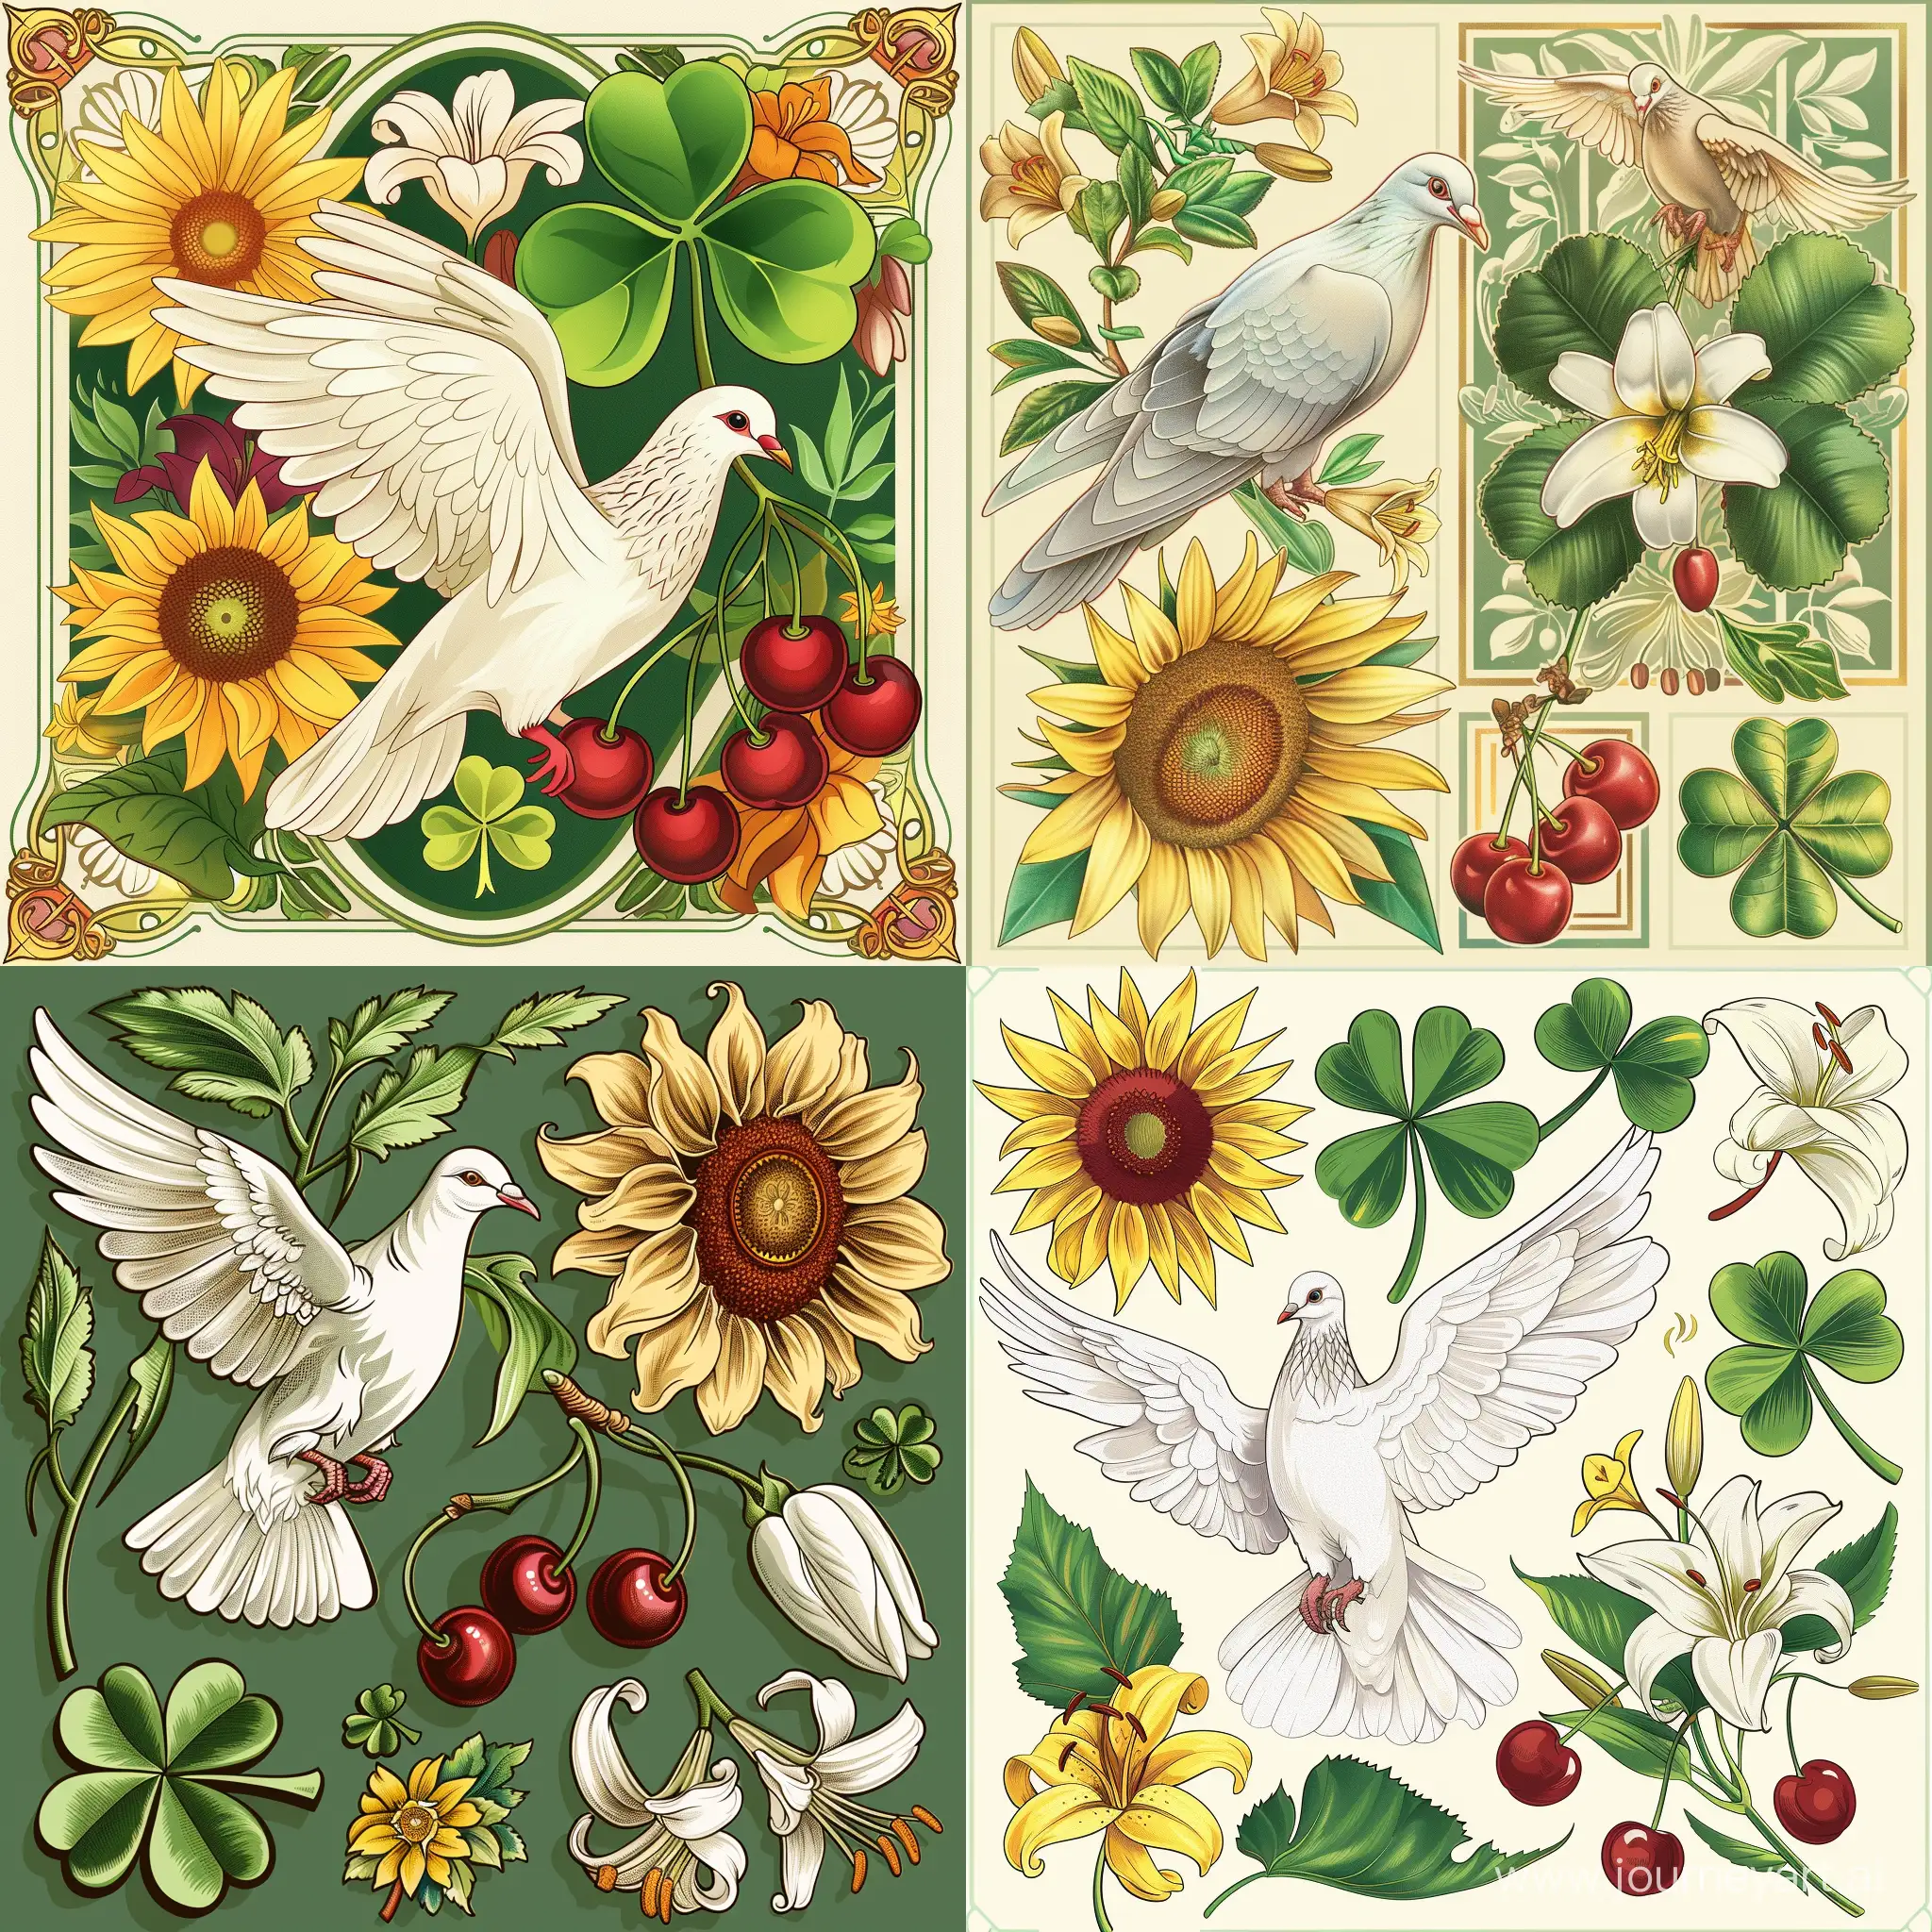 Dove, sunflower, lily, cherry, four-leaf clover, Alphonse Mucha style, in flat style, high quality details